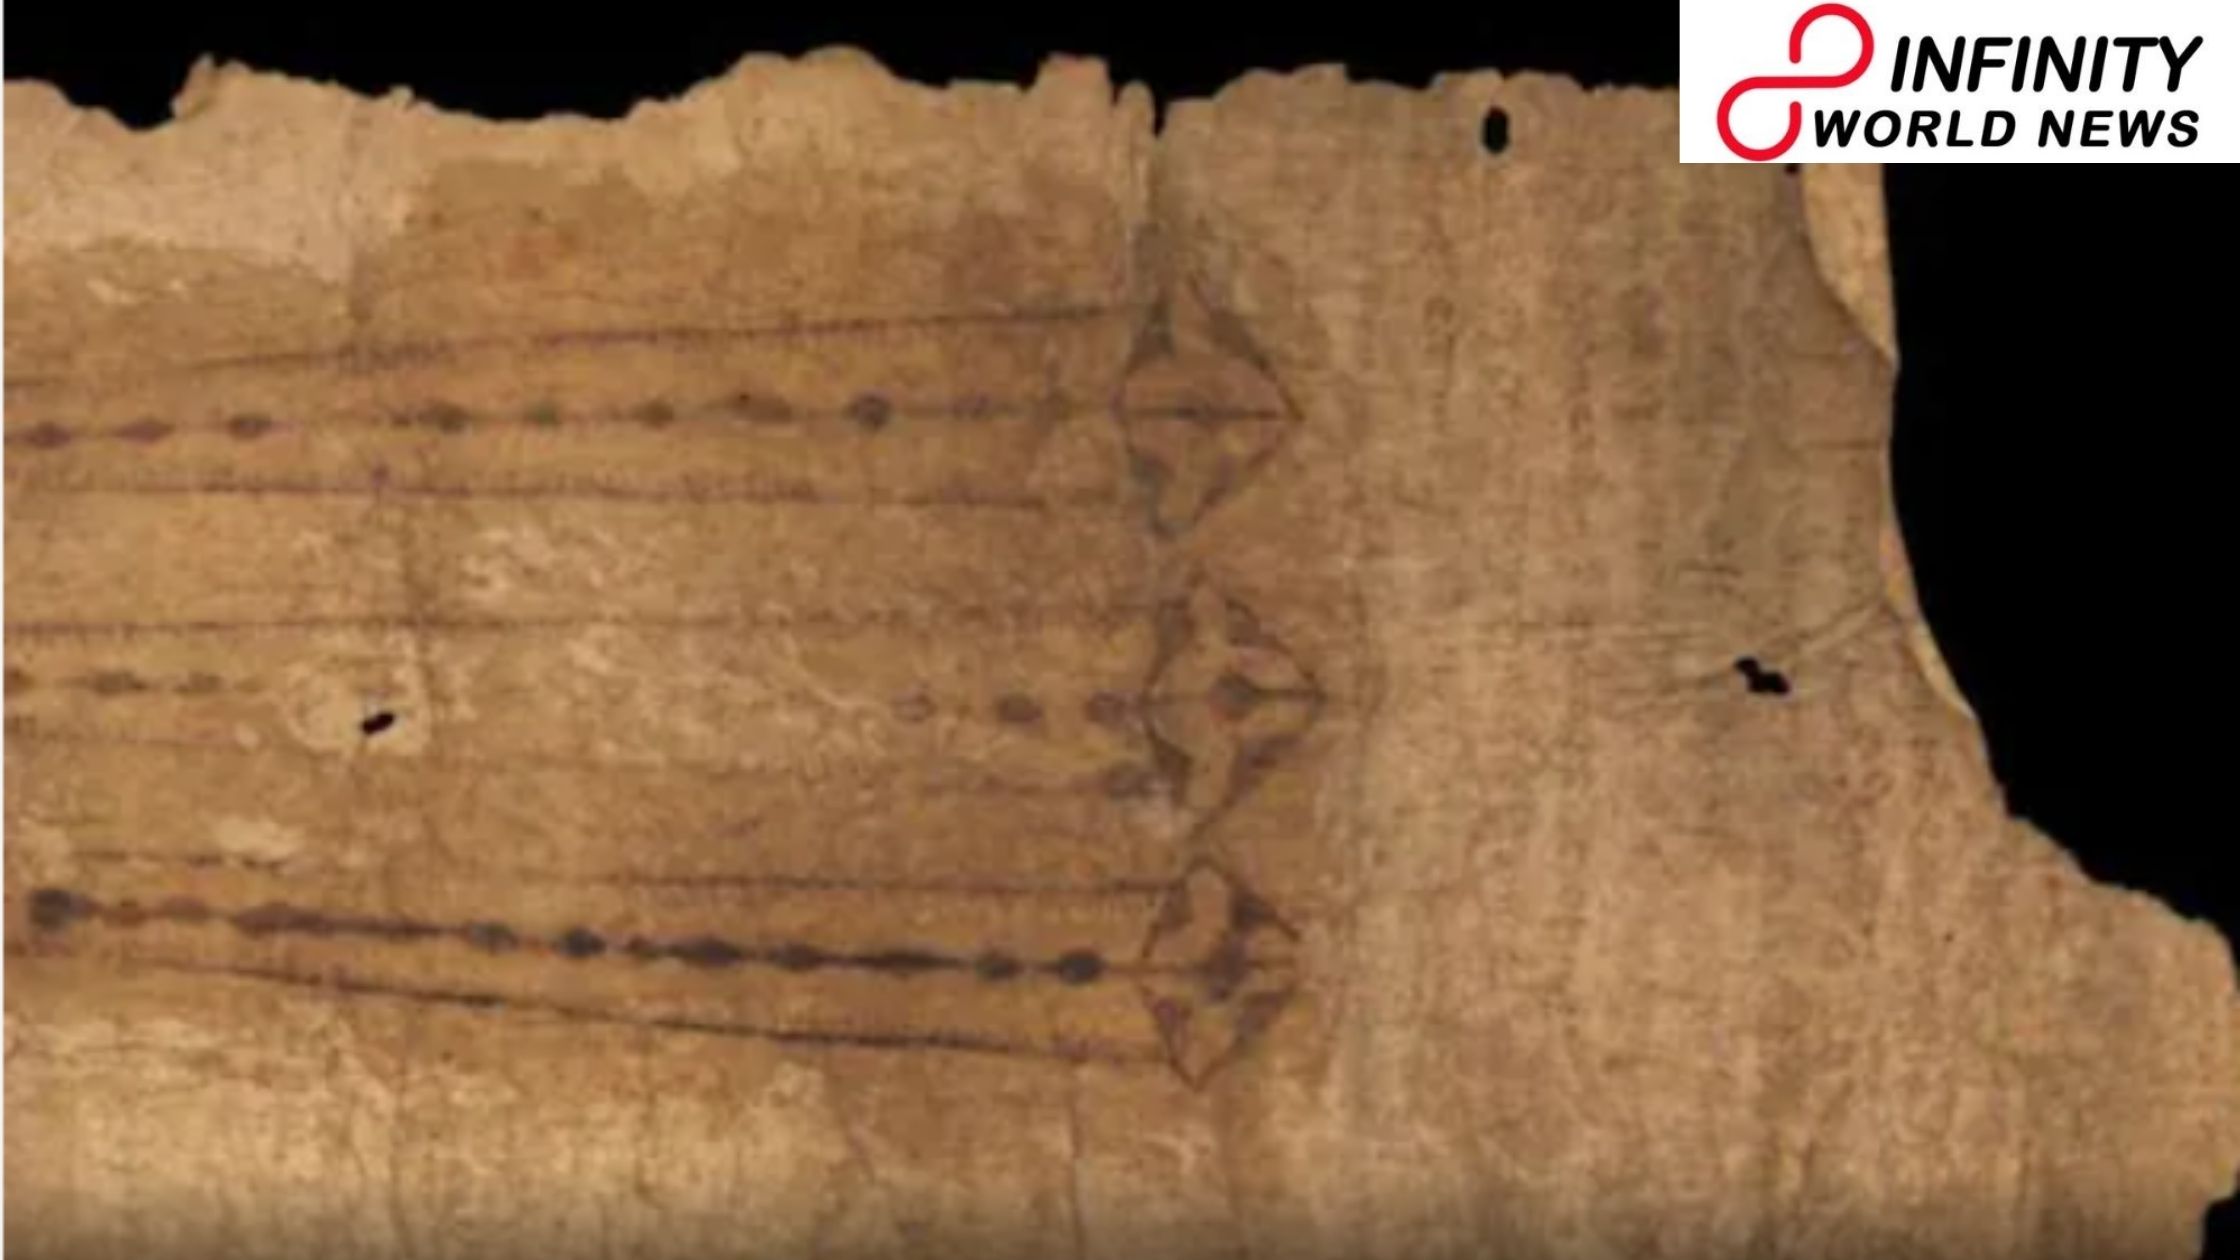 Fifteenth Century Parchment Reveals Secrets of Medieval Childbirths, Suggests Honey, Milk and Eggs Were Used